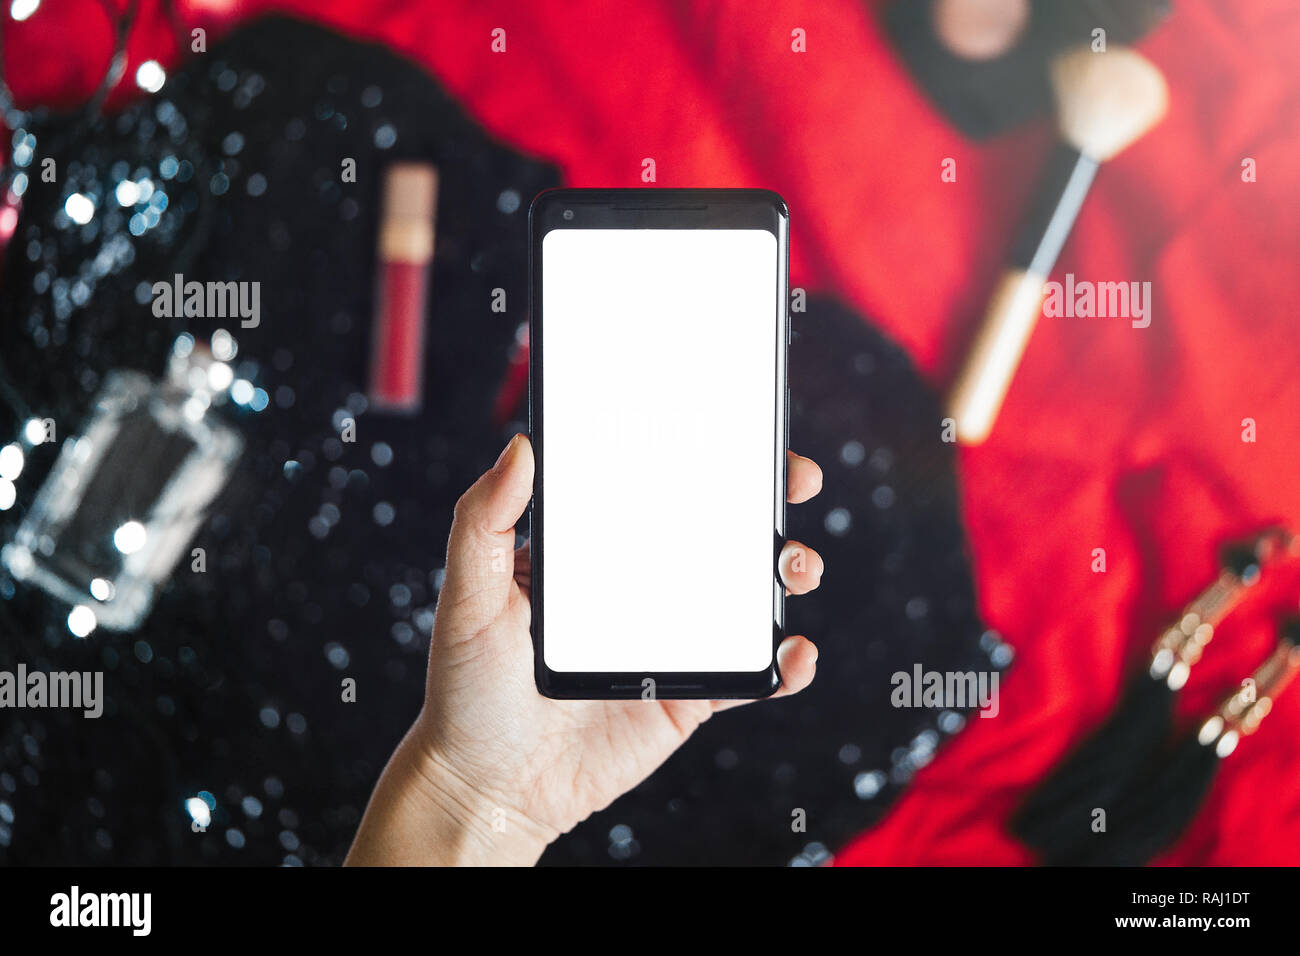 Close up of hand holding mobile phone with blank screen above cocktail dress. Stock Photo